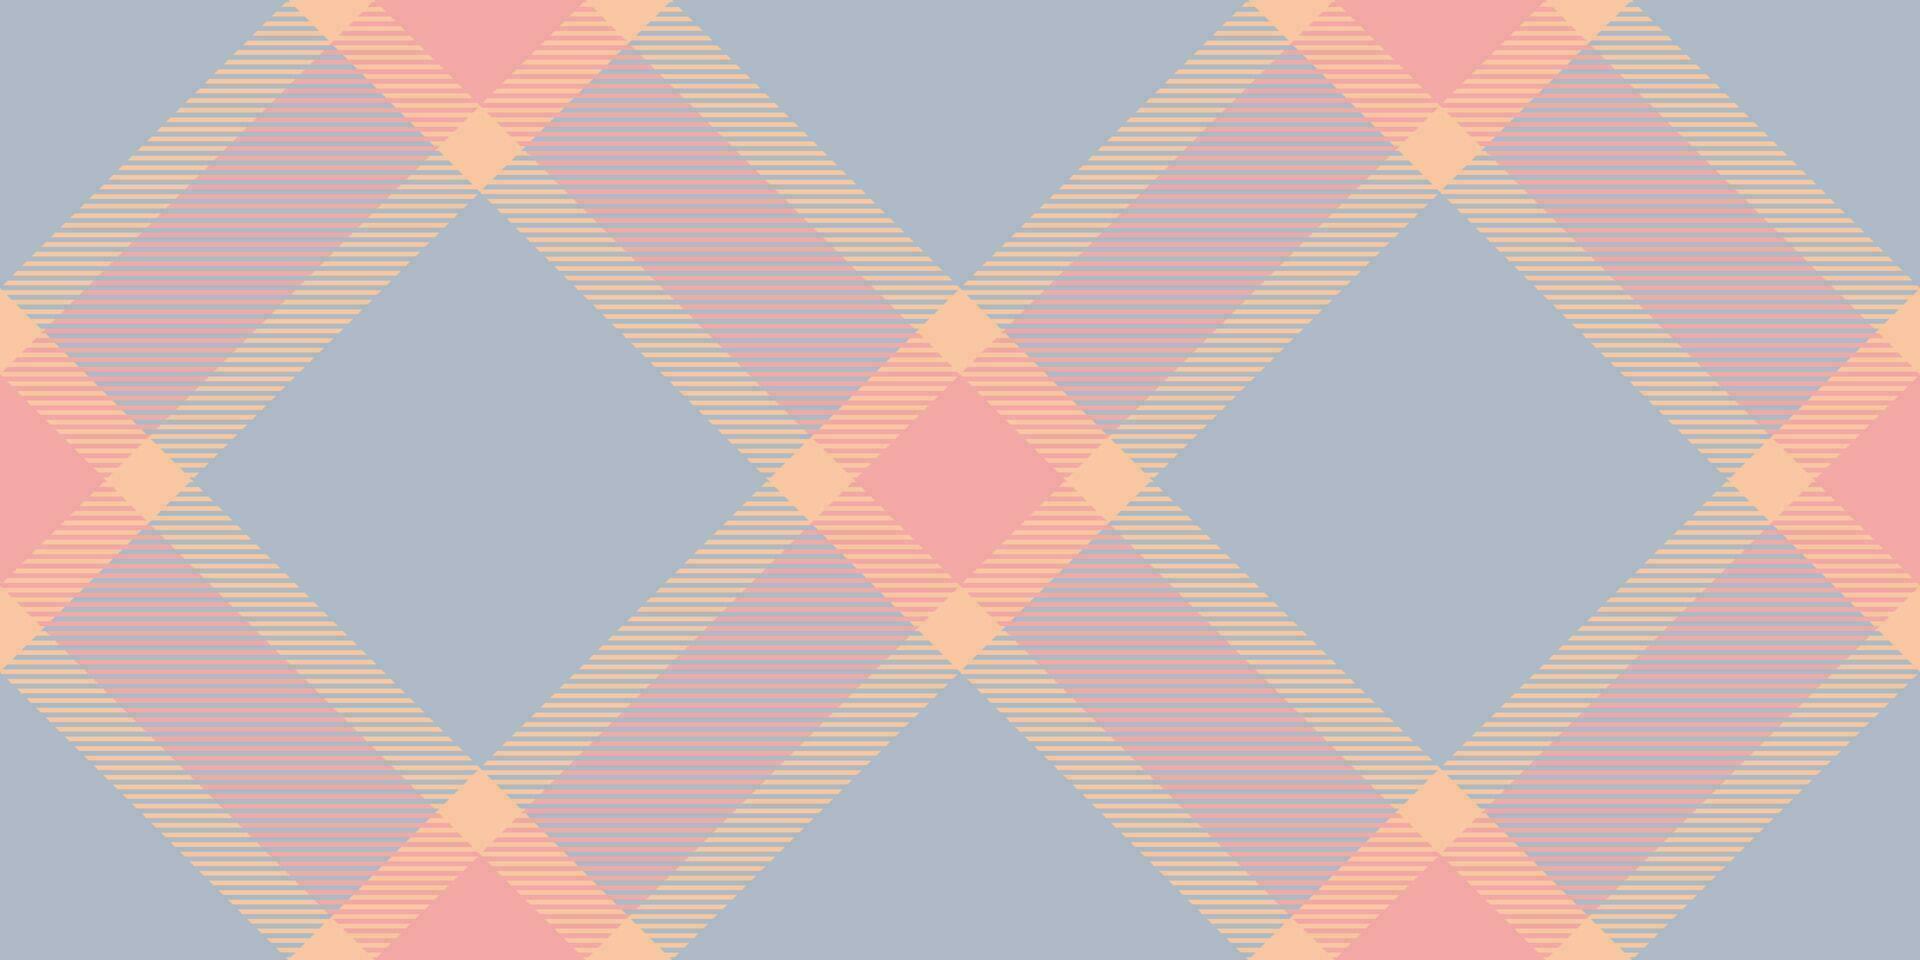 Gift tartan seamless plaid, poster fabric check background. Chequered textile texture vector pattern in pastel and red colors.